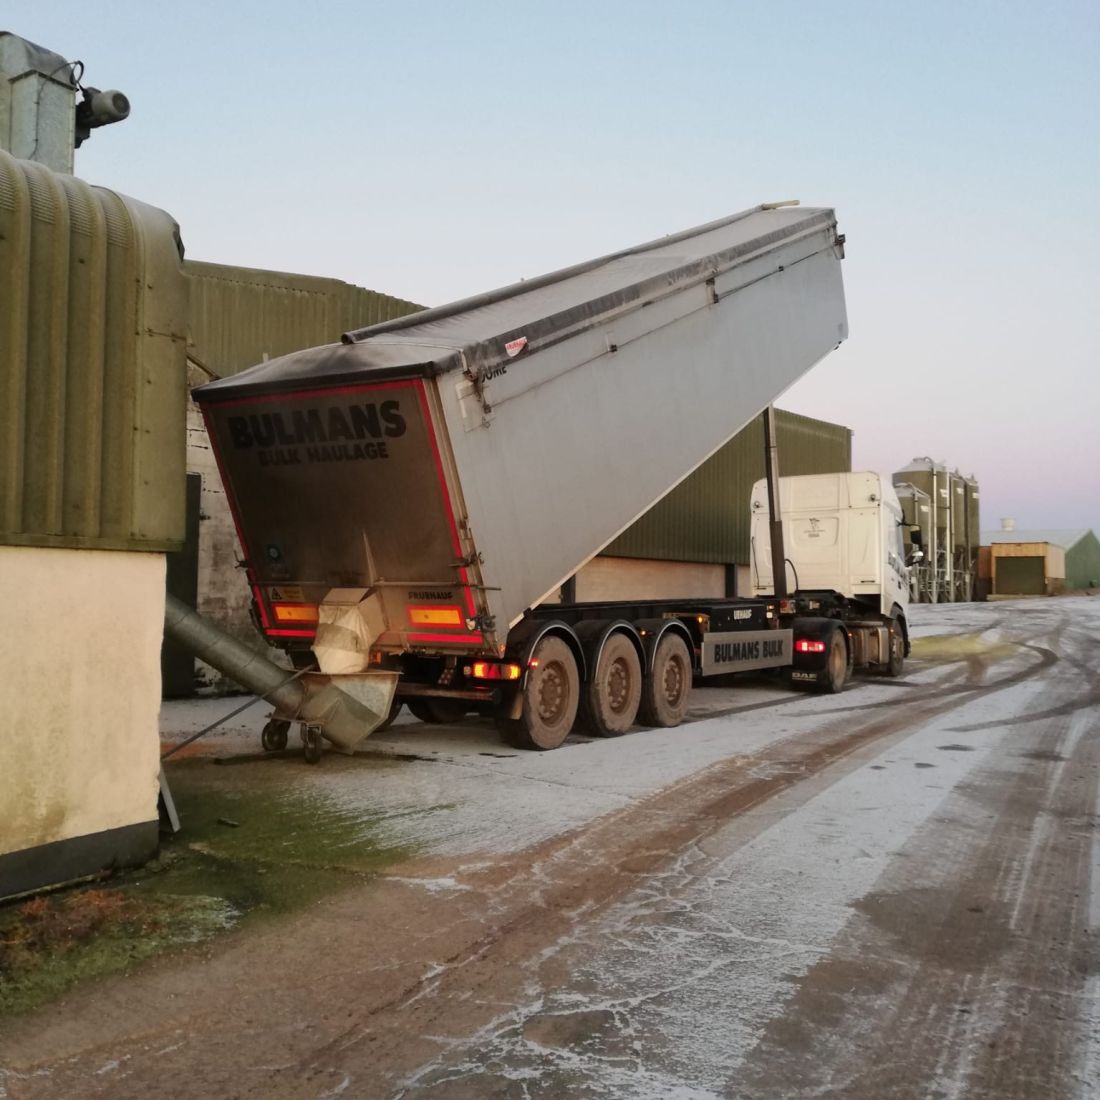 A Bulmans Bulk Haulage tipper truck unloads materials at a storage facility during dawn, on an icy day.